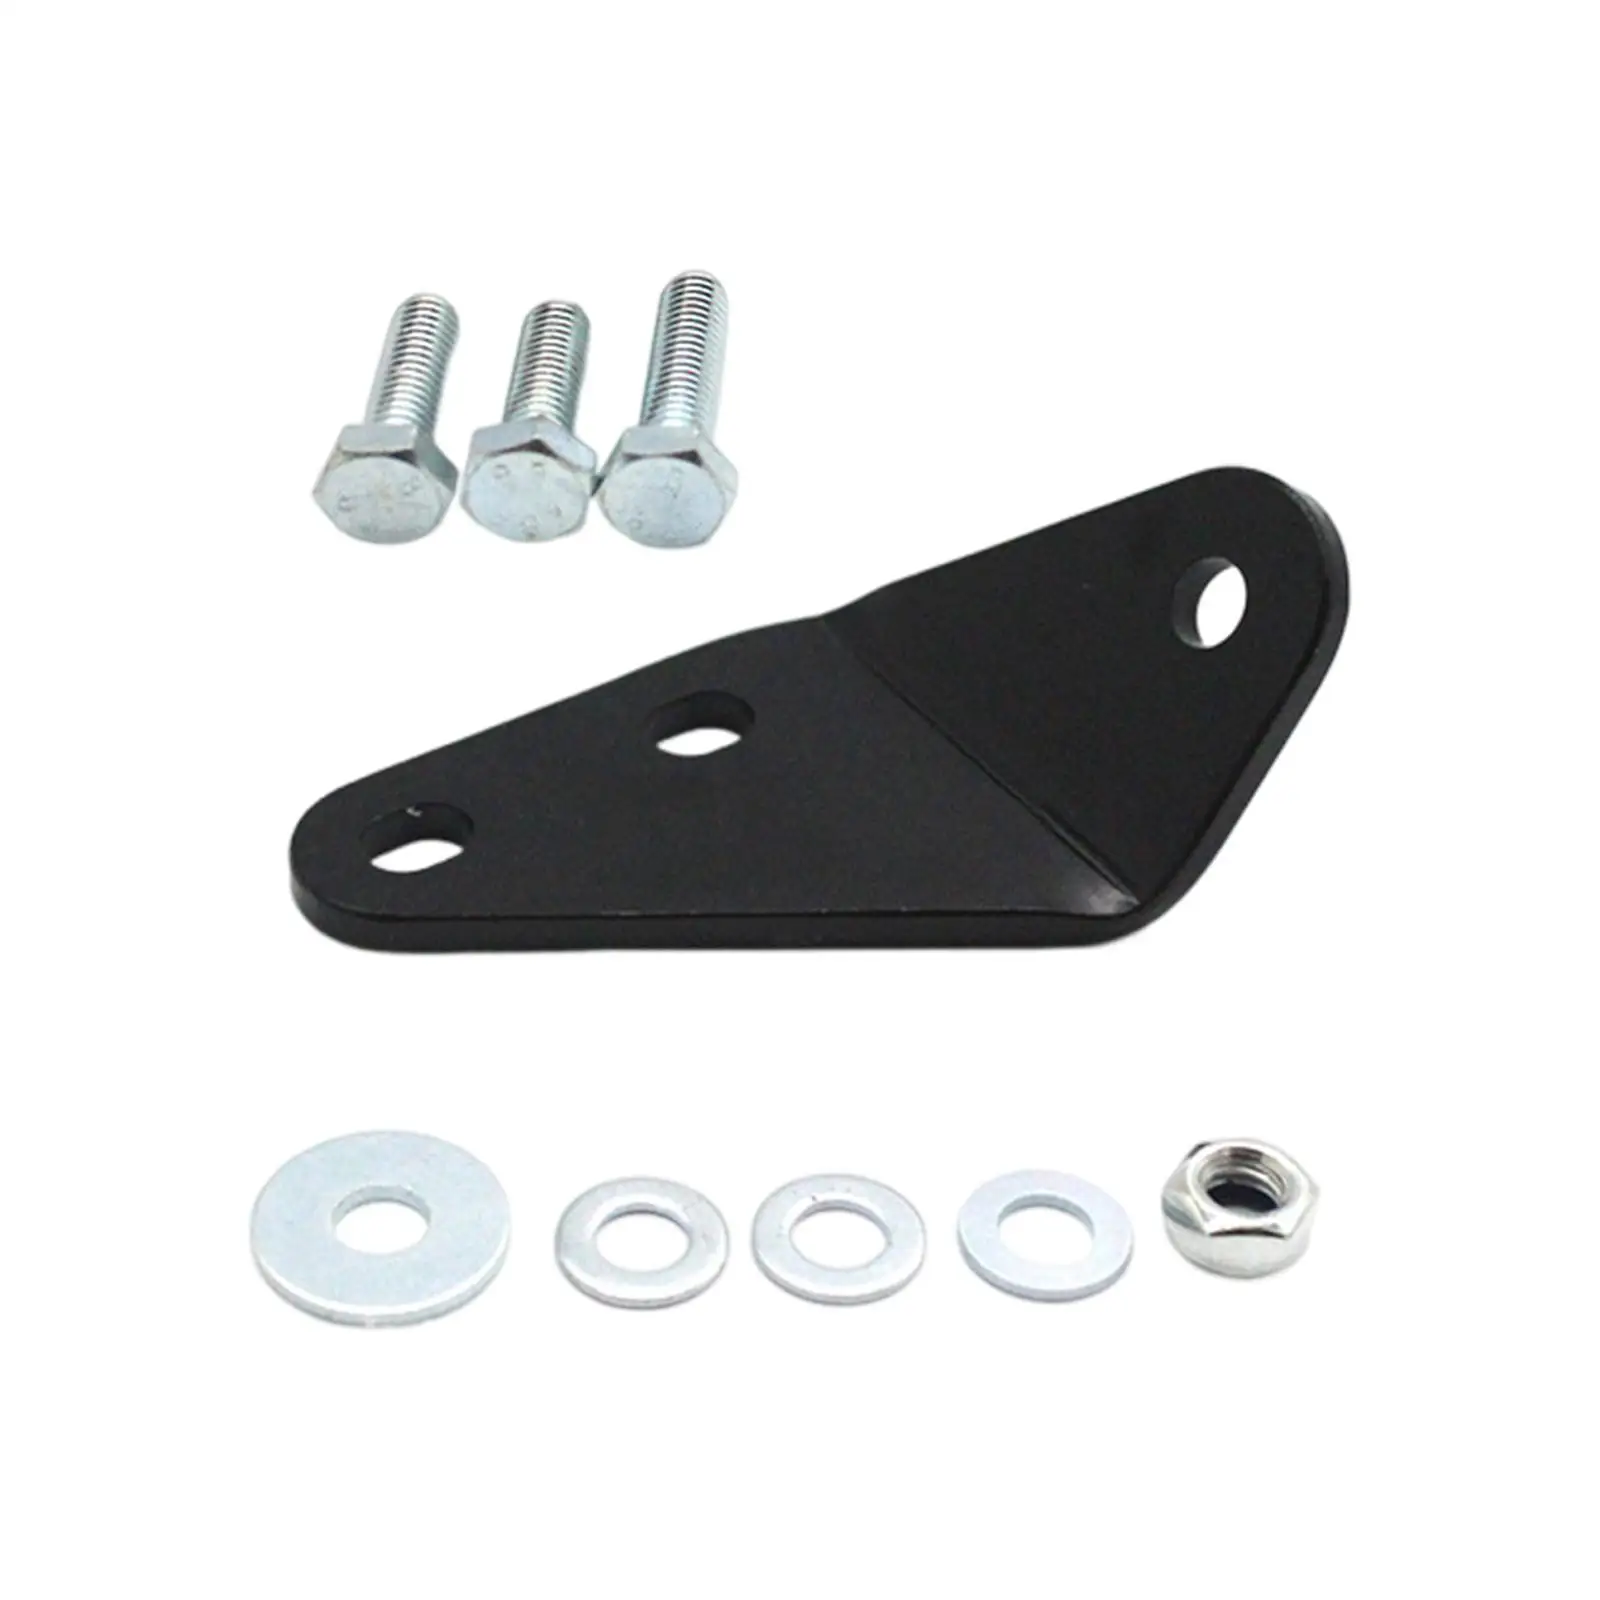 Clutch Pedal Bracket Metal Directly Replace High Performance for Volkswagen T4 Transporter Multivan Caravelle Accessories